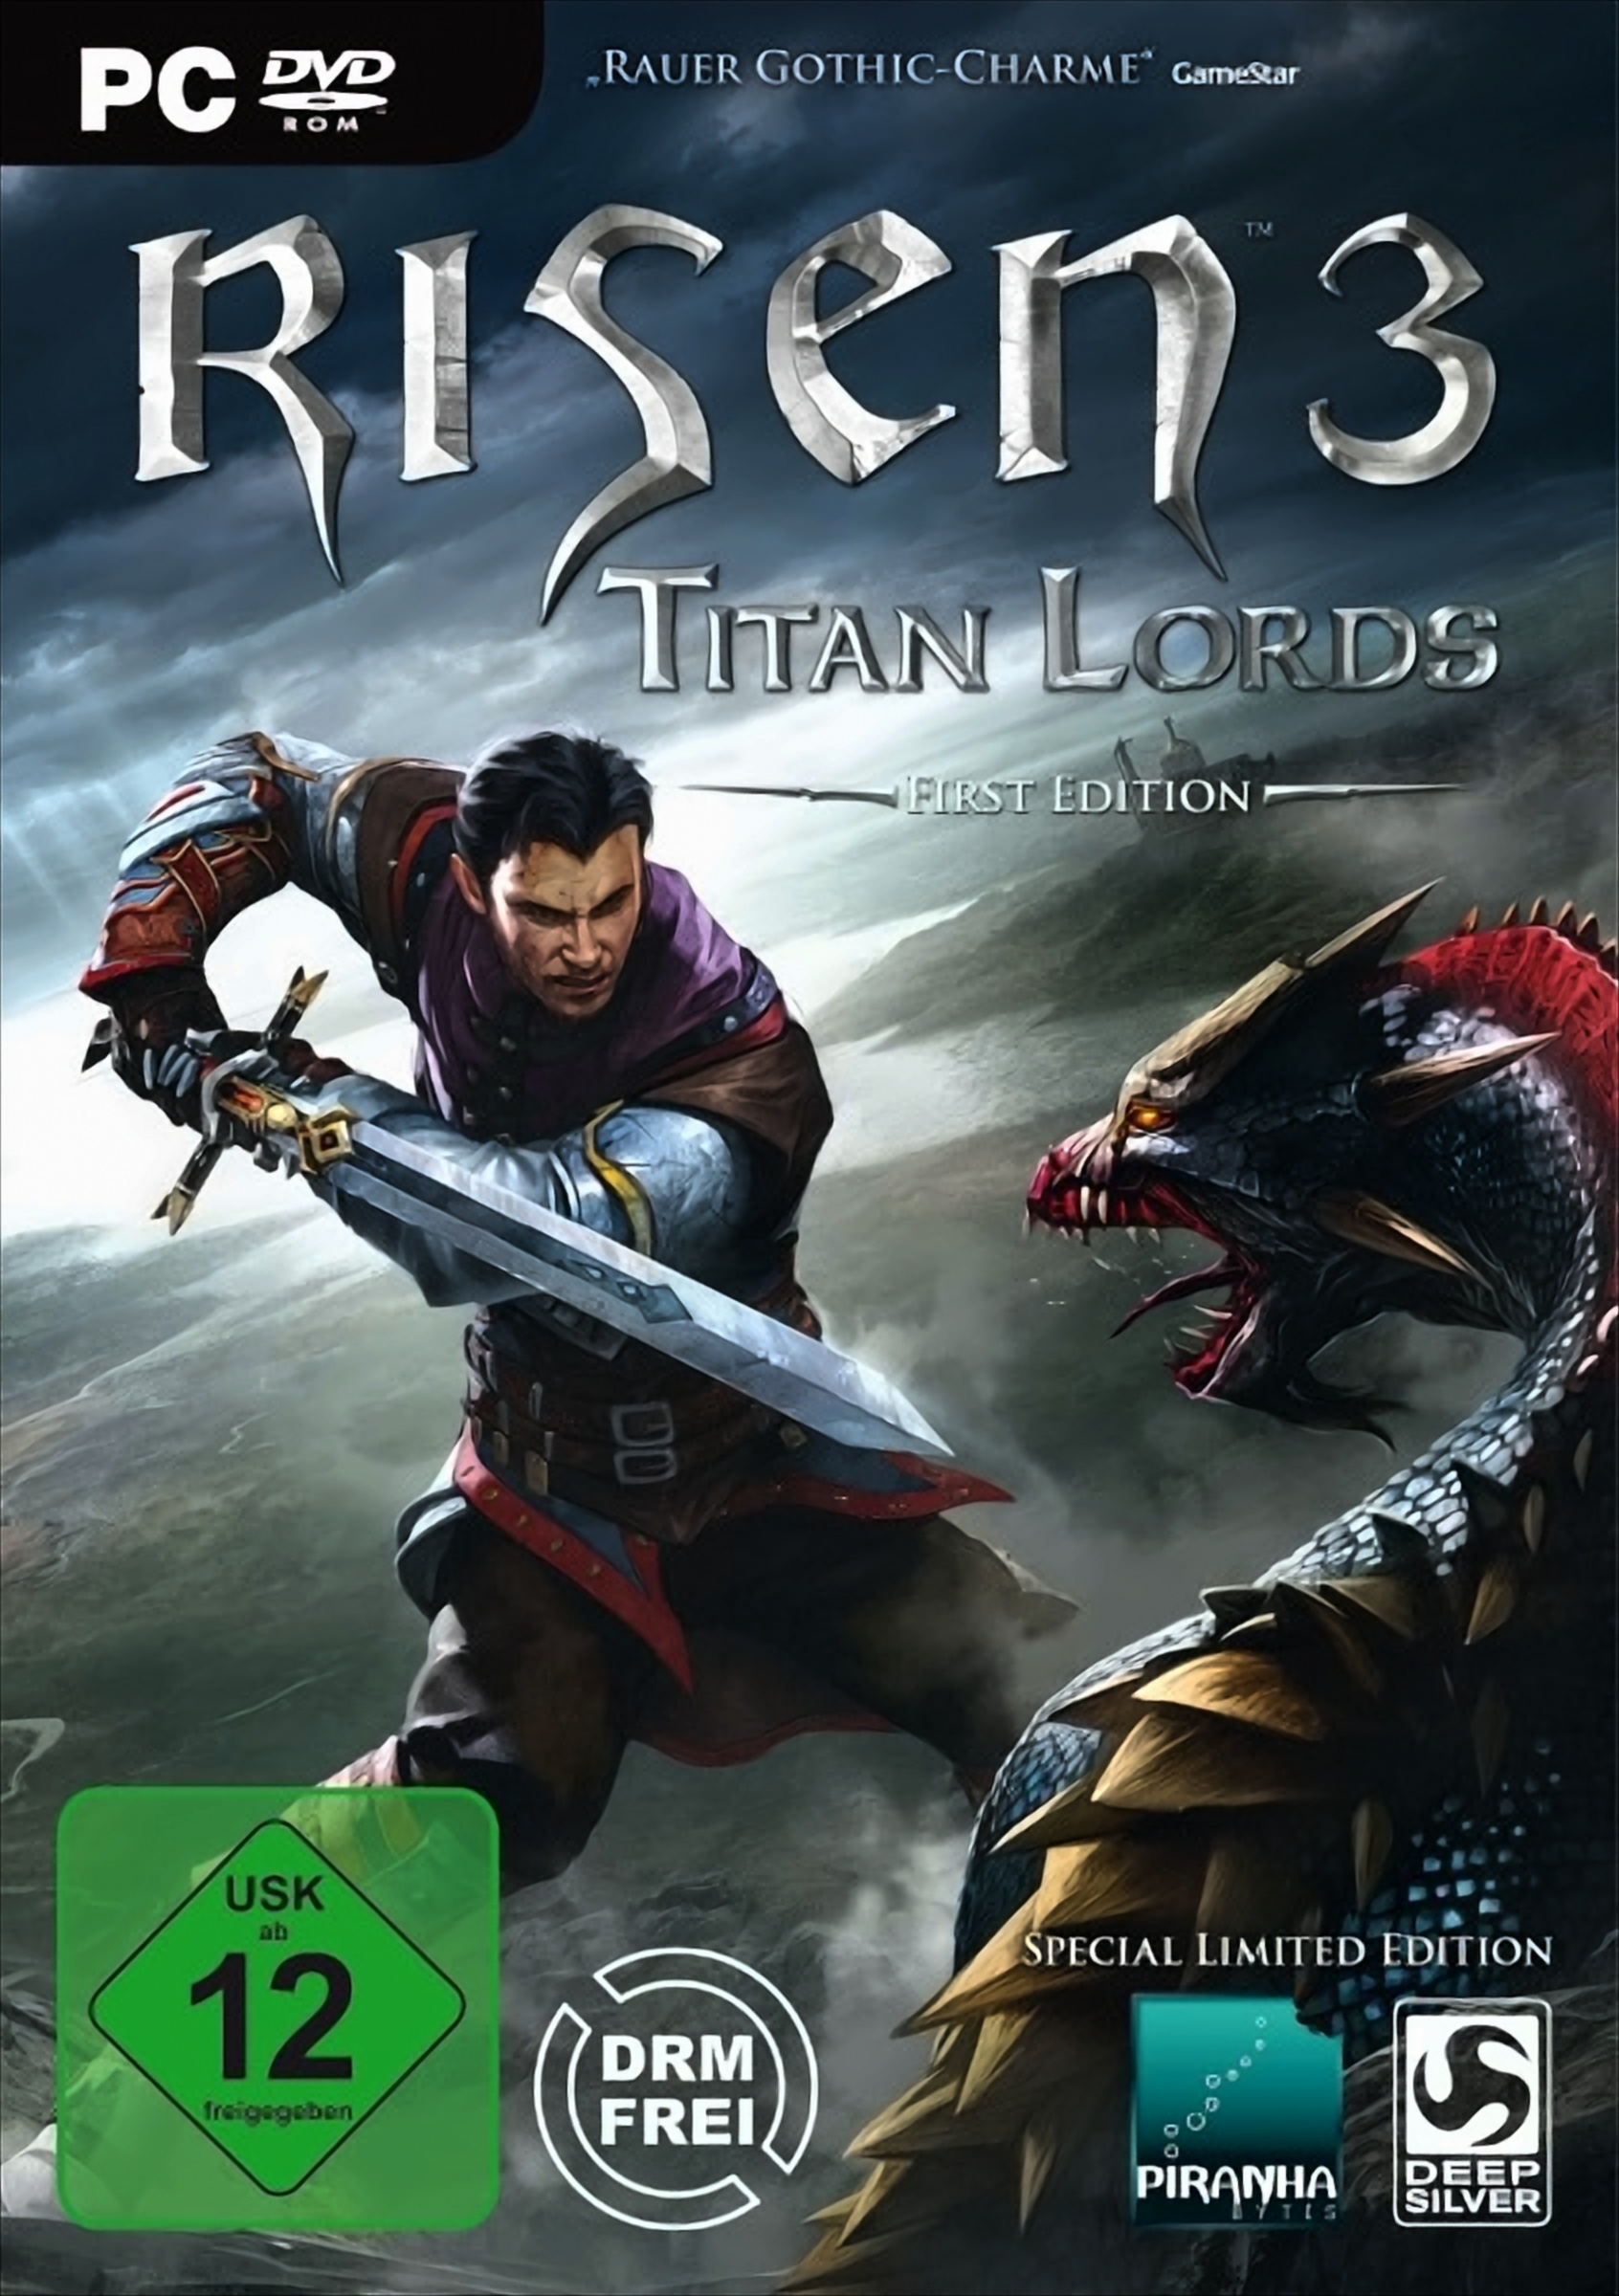 Edition 3: Lords Titan Limited - (USK) (PC) Risen Special [PC]